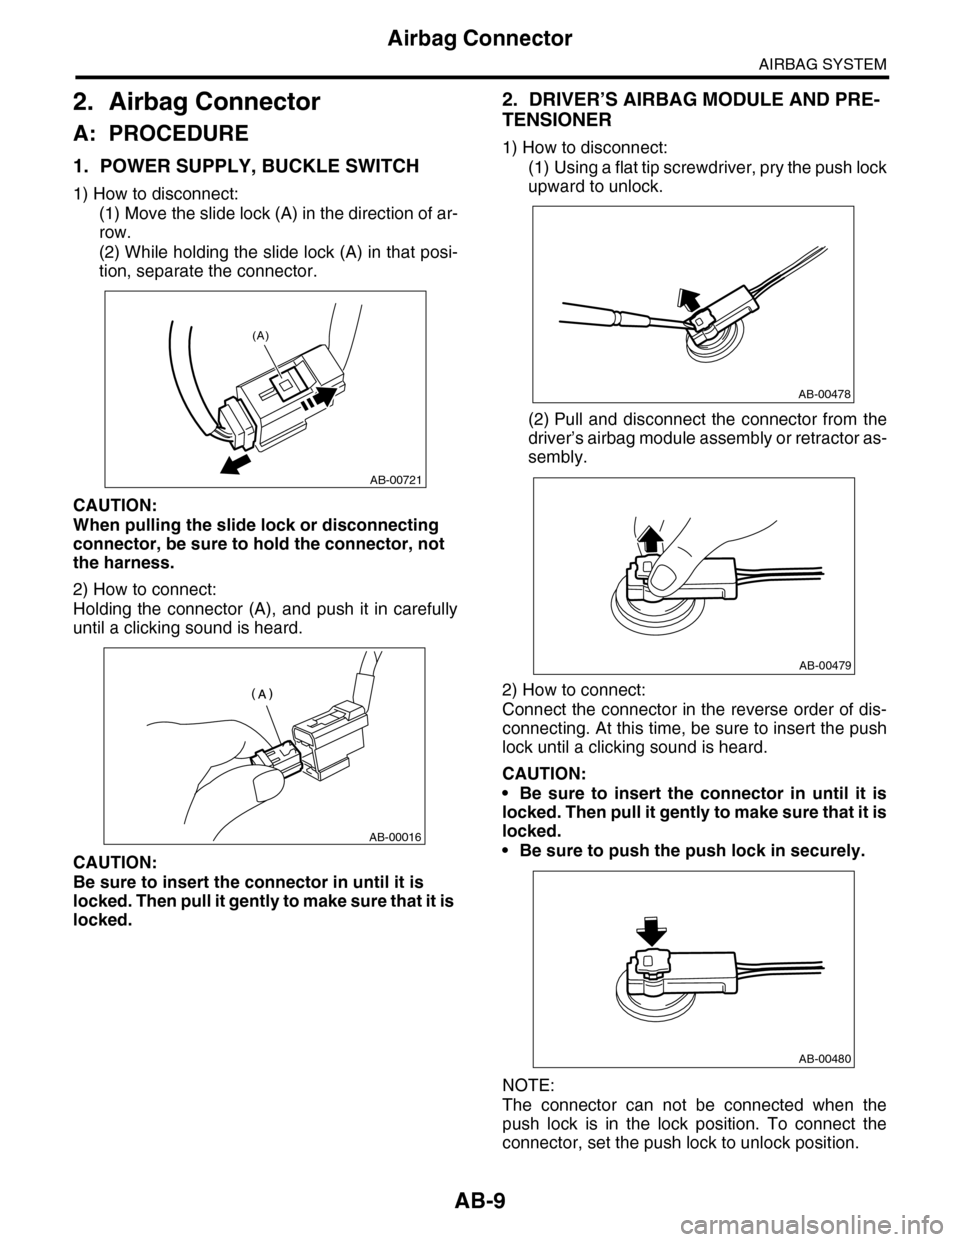 SUBARU TRIBECA 2009 1.G Service Workshop Manual AB-9
Airbag Connector
AIRBAG SYSTEM
2. Airbag Connector
A: PROCEDURE
1. POWER SUPPLY, BUCKLE SWITCH
1) How to disconnect:
(1) Move the slide lock (A) in the direction of ar-
row.
(2) While holding the